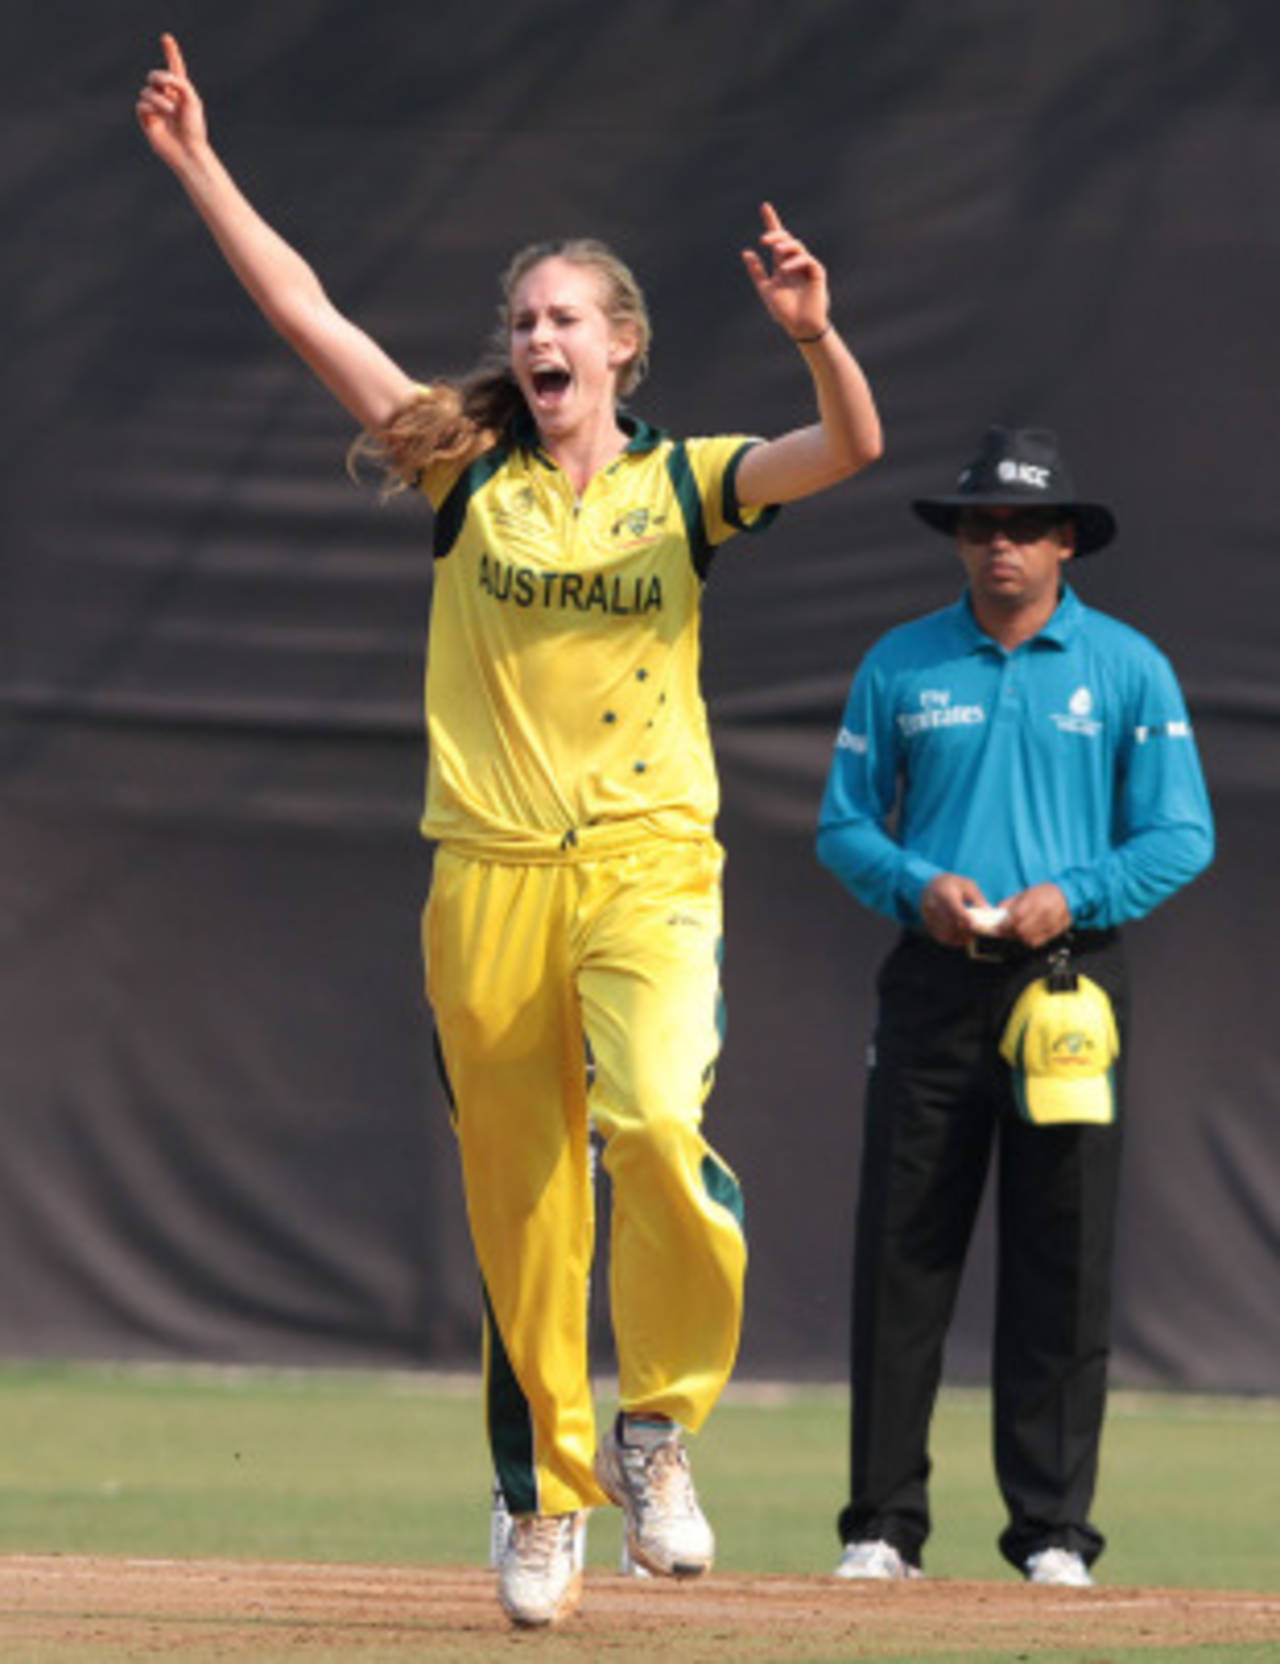 Holly Ferling has been one of the discoveries for Australia this World Cup&nbsp;&nbsp;&bull;&nbsp;&nbsp;ICC/Solaris Images